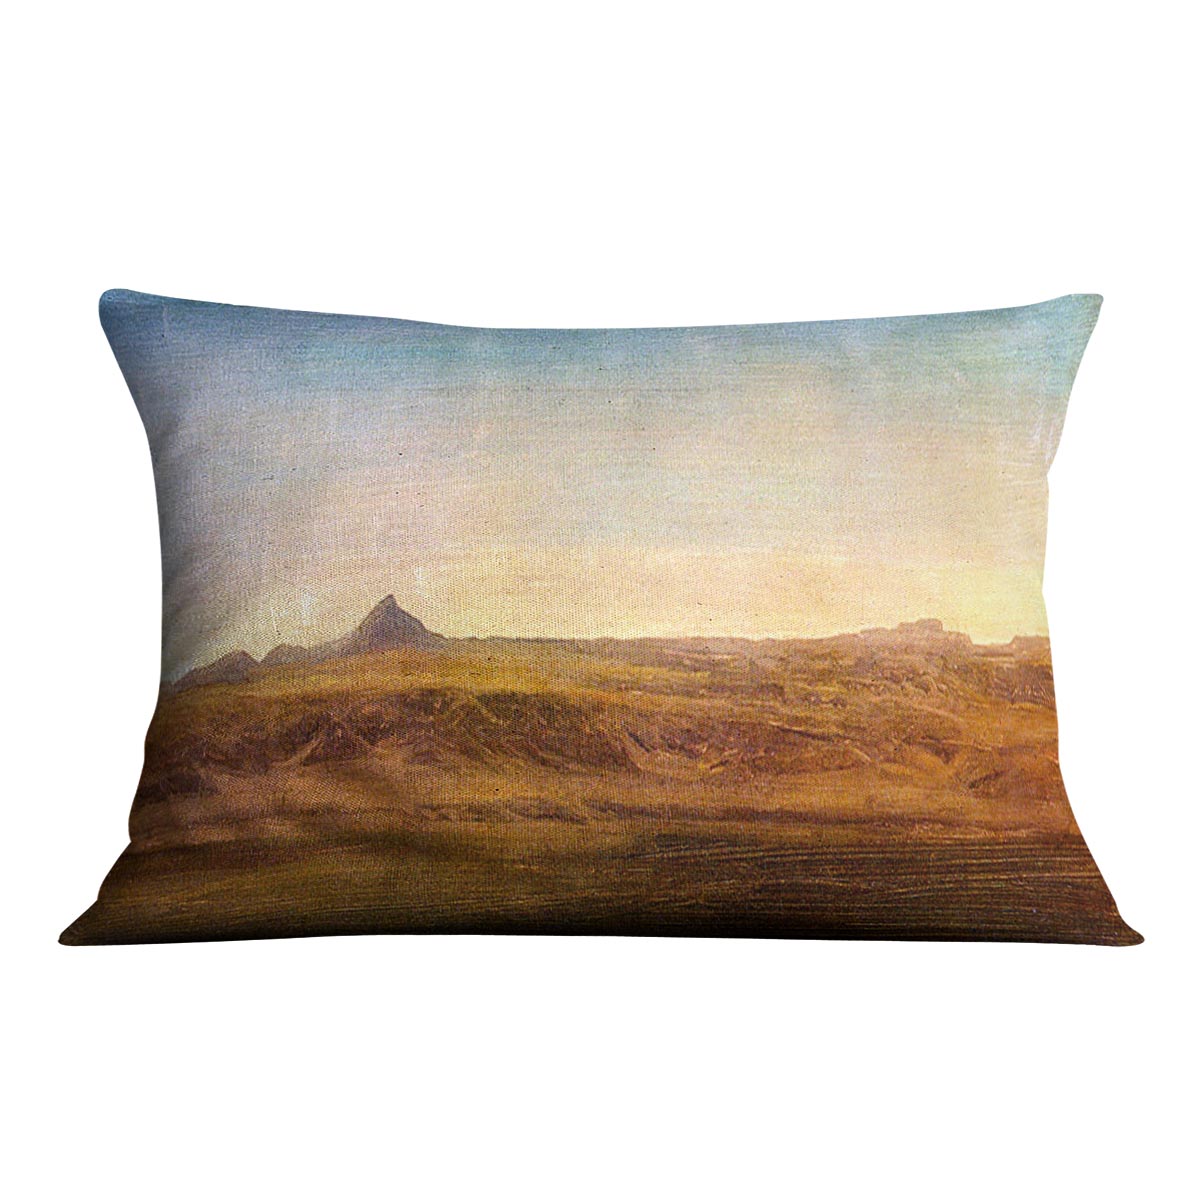 At the Level by Bierstadt Cushion - Canvas Art Rocks - 4